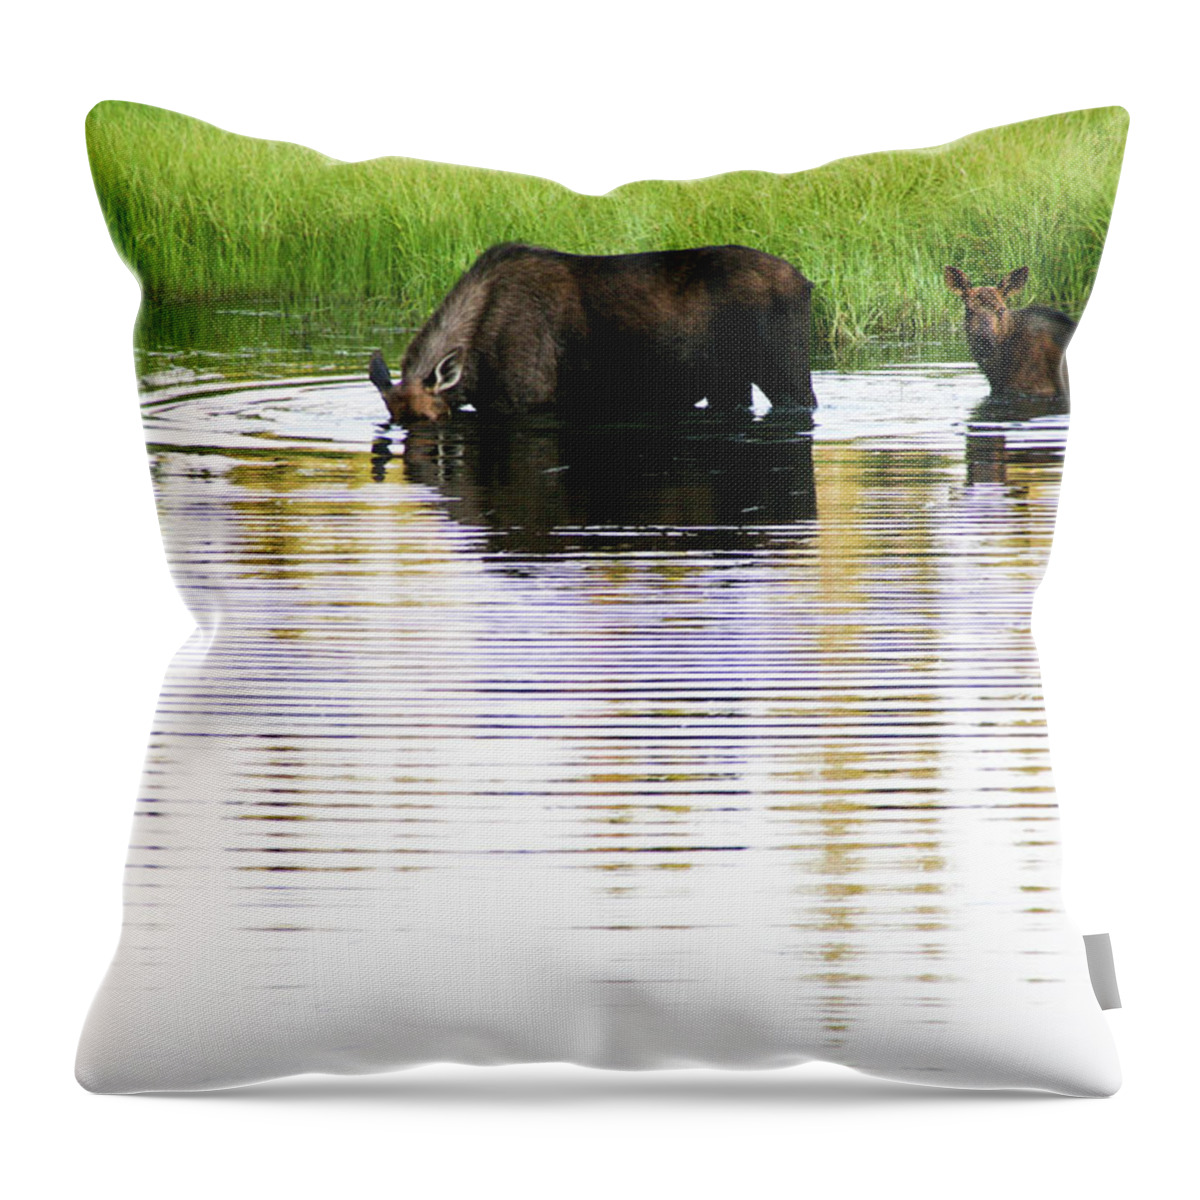 Grass Throw Pillow featuring the photograph Moose In Lake by Universal Stopping Point Photography